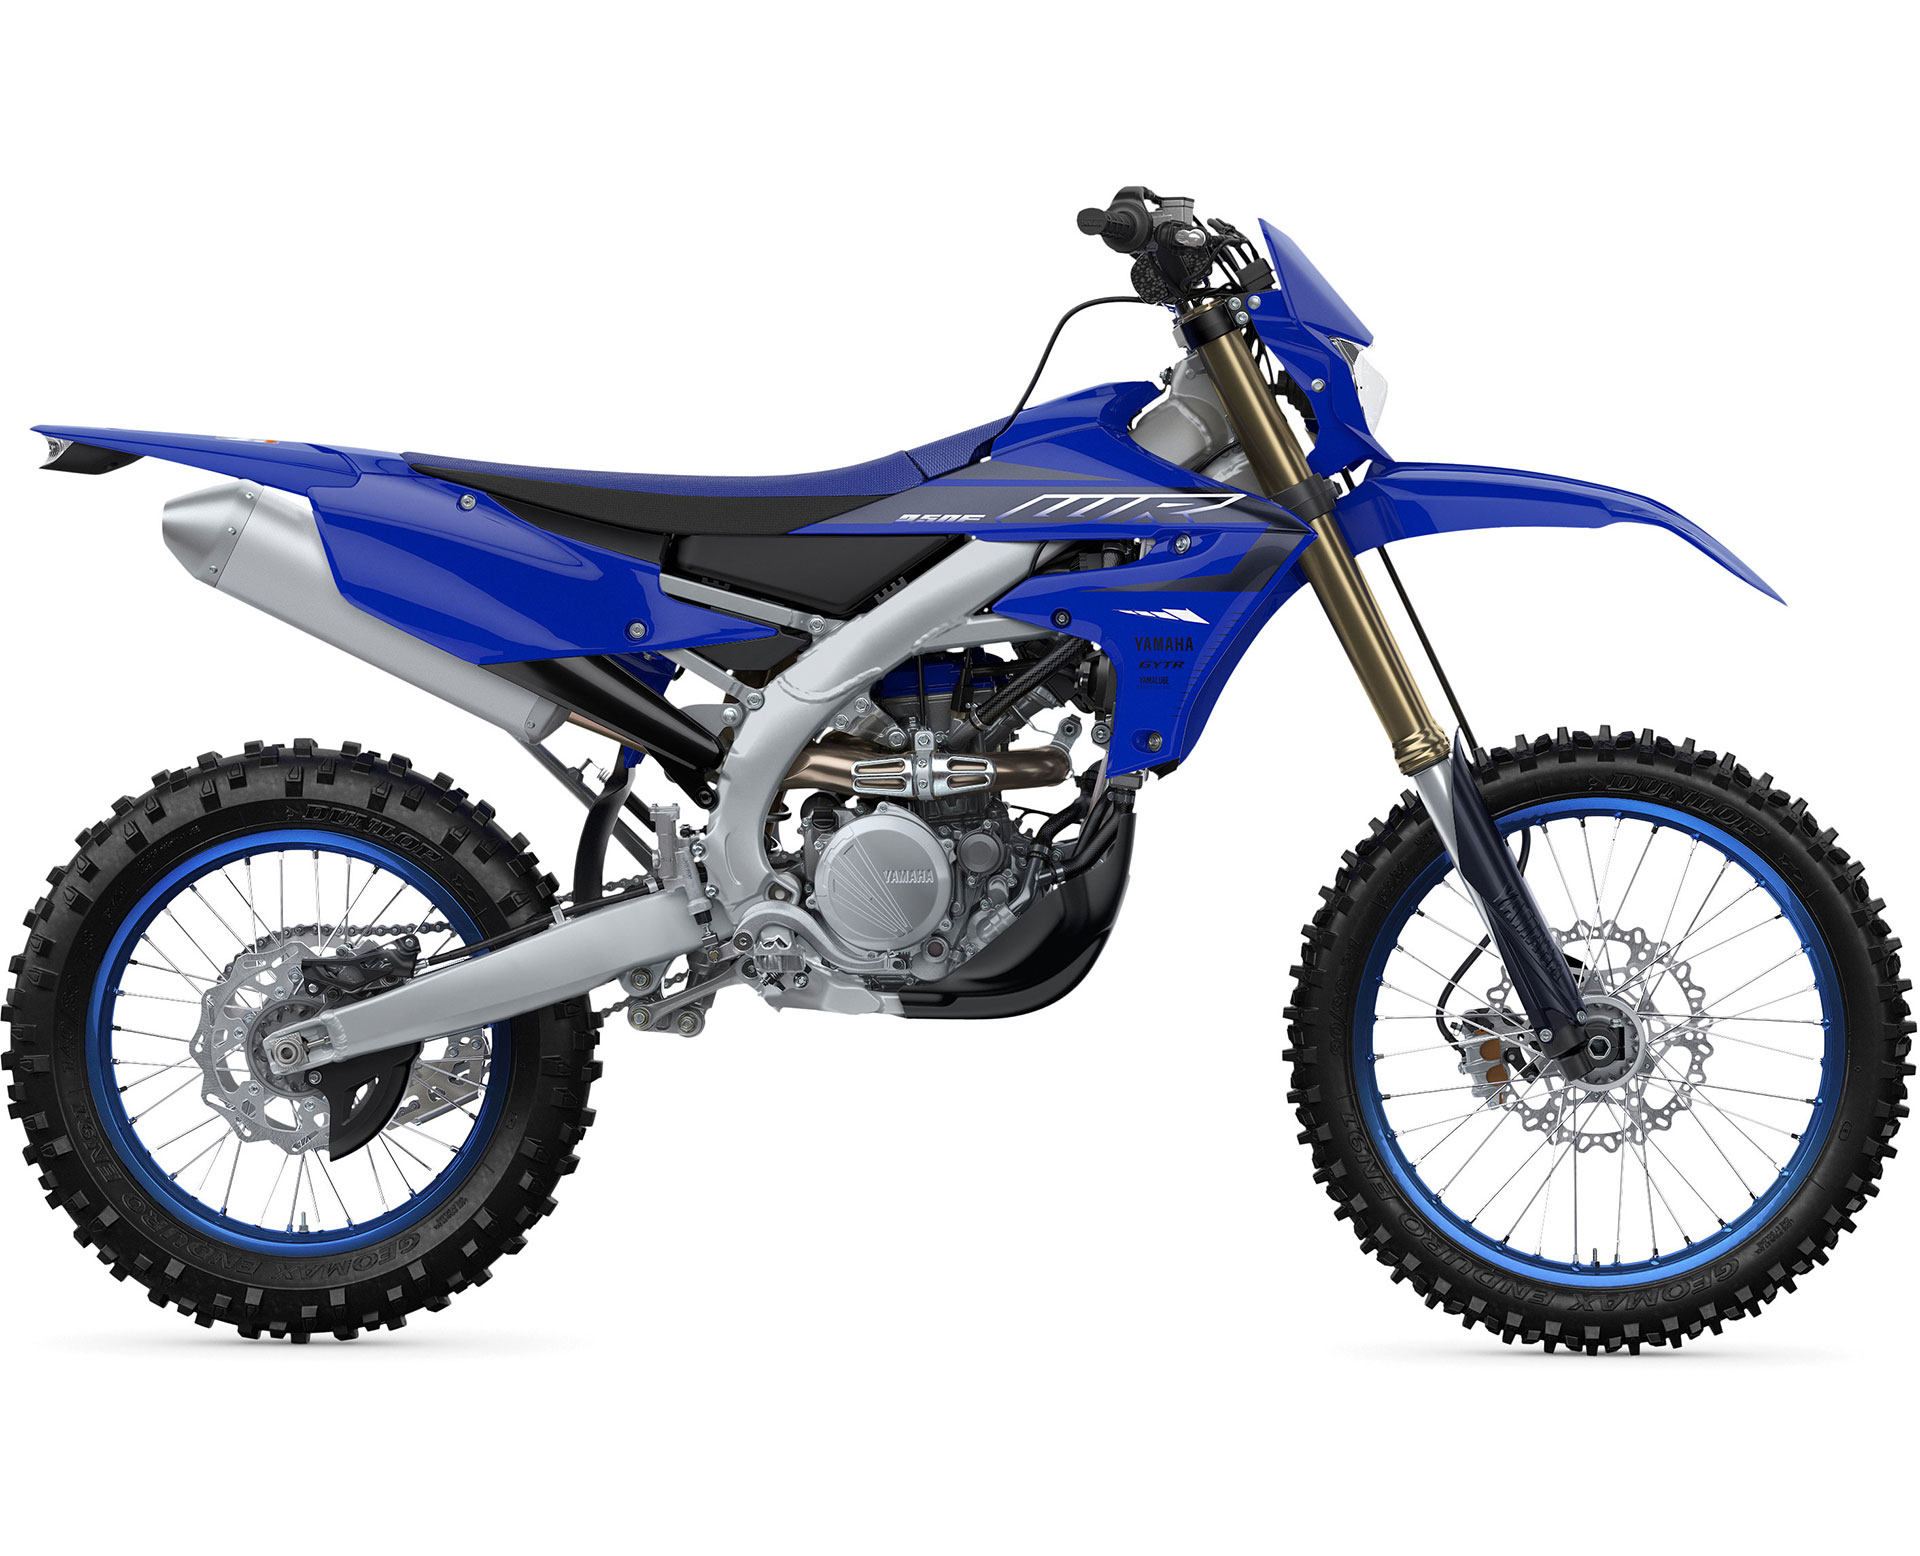 Thumbnail of your customized 2023 WR250F